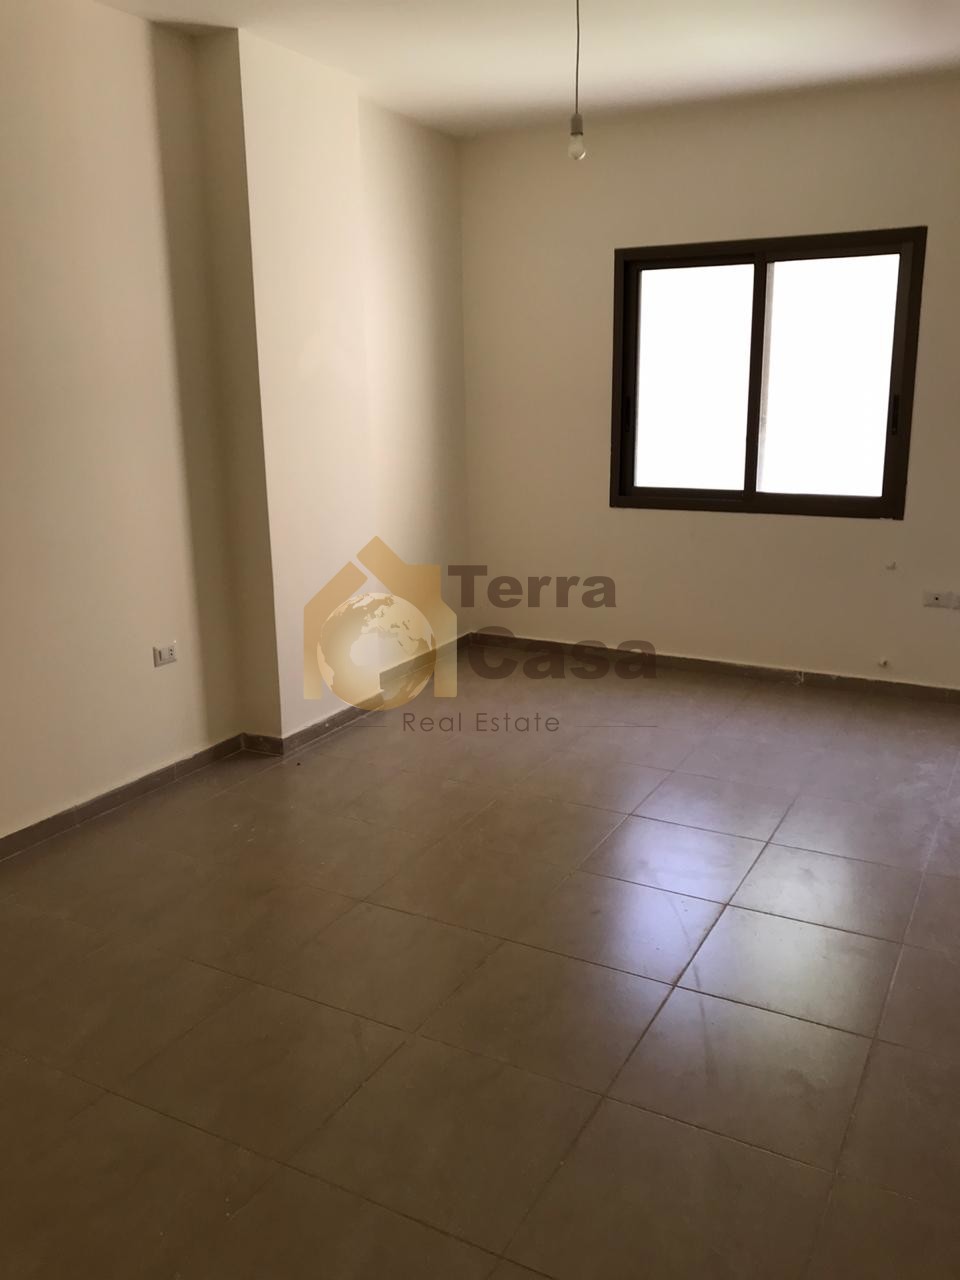 Luxurious brand new apartment cash payment.Ref# 2520